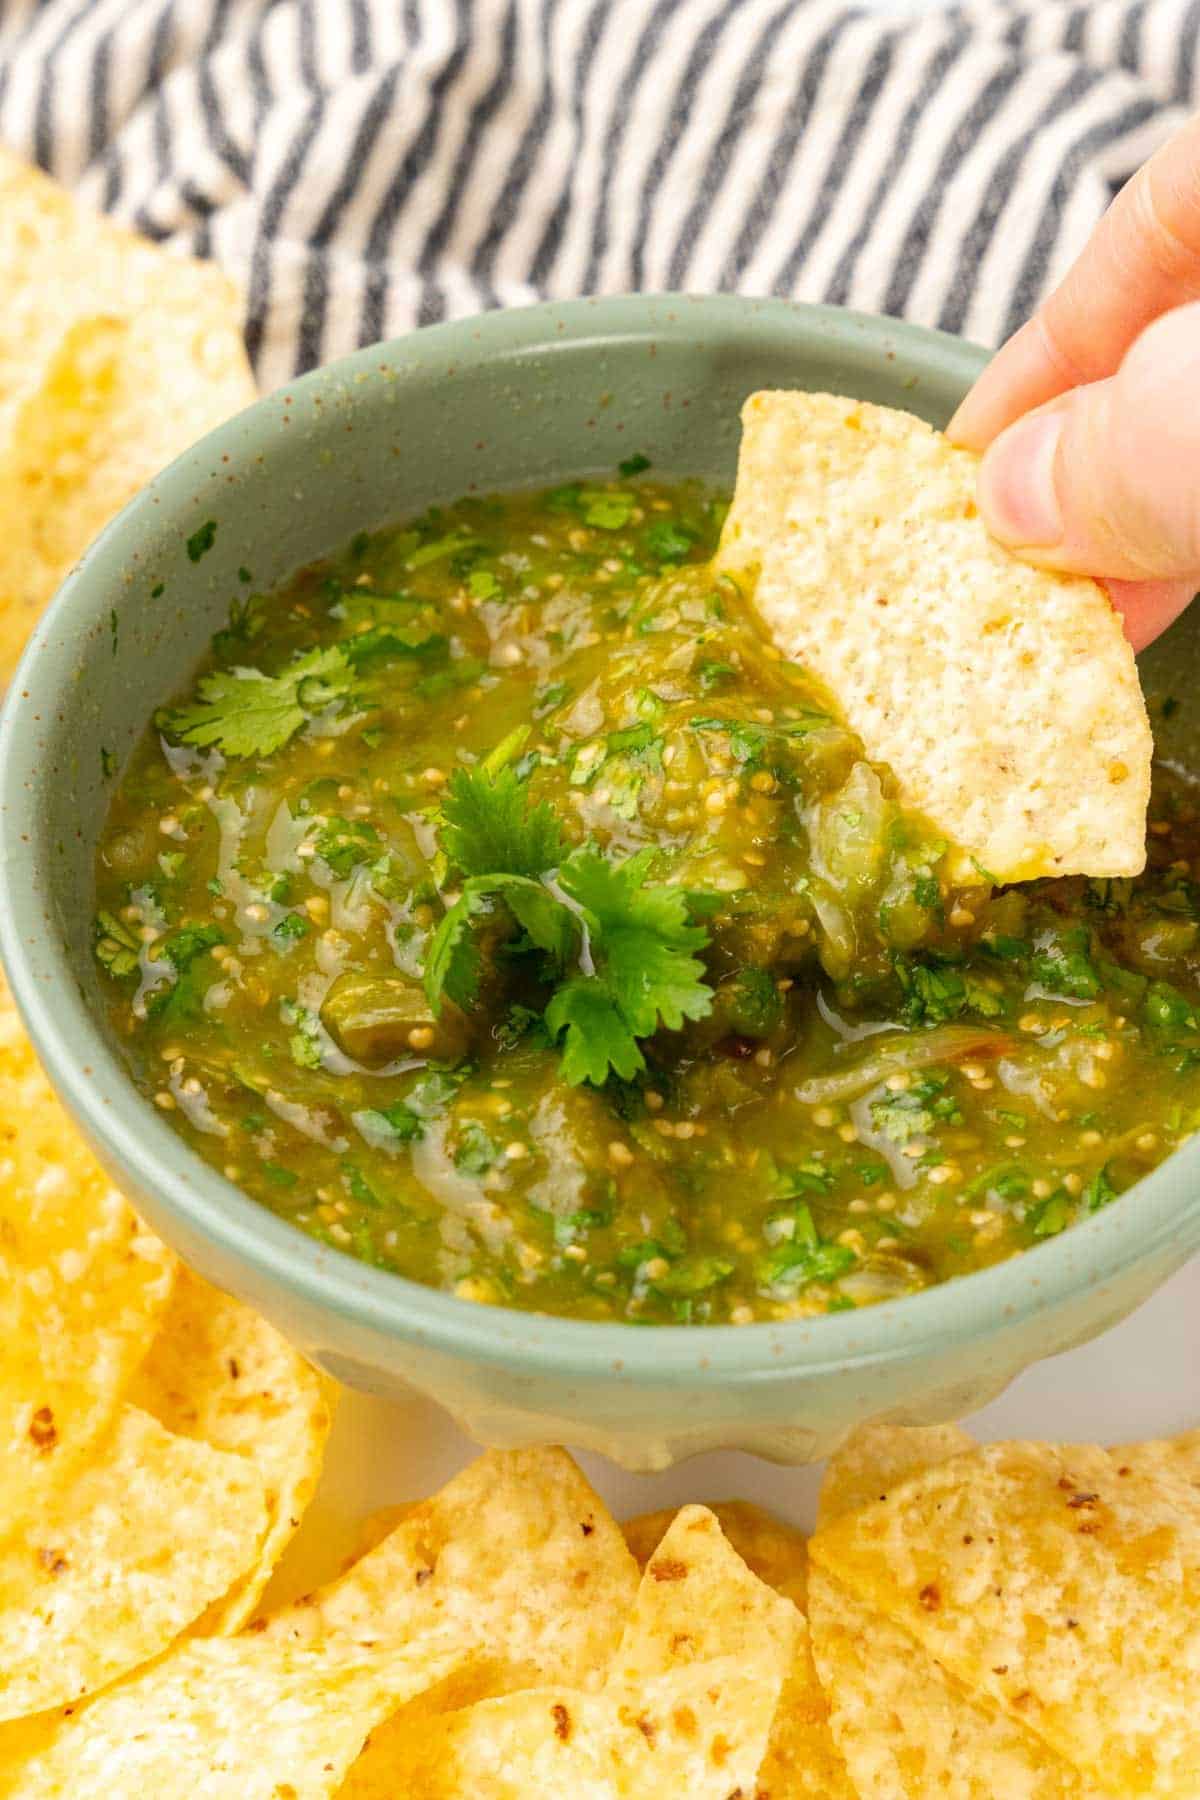 A hand dipping a tortilla chip into the salsa in a green bowl on a white plate surrounded by more tortilla chips with a blue striped cloth napkin in the background